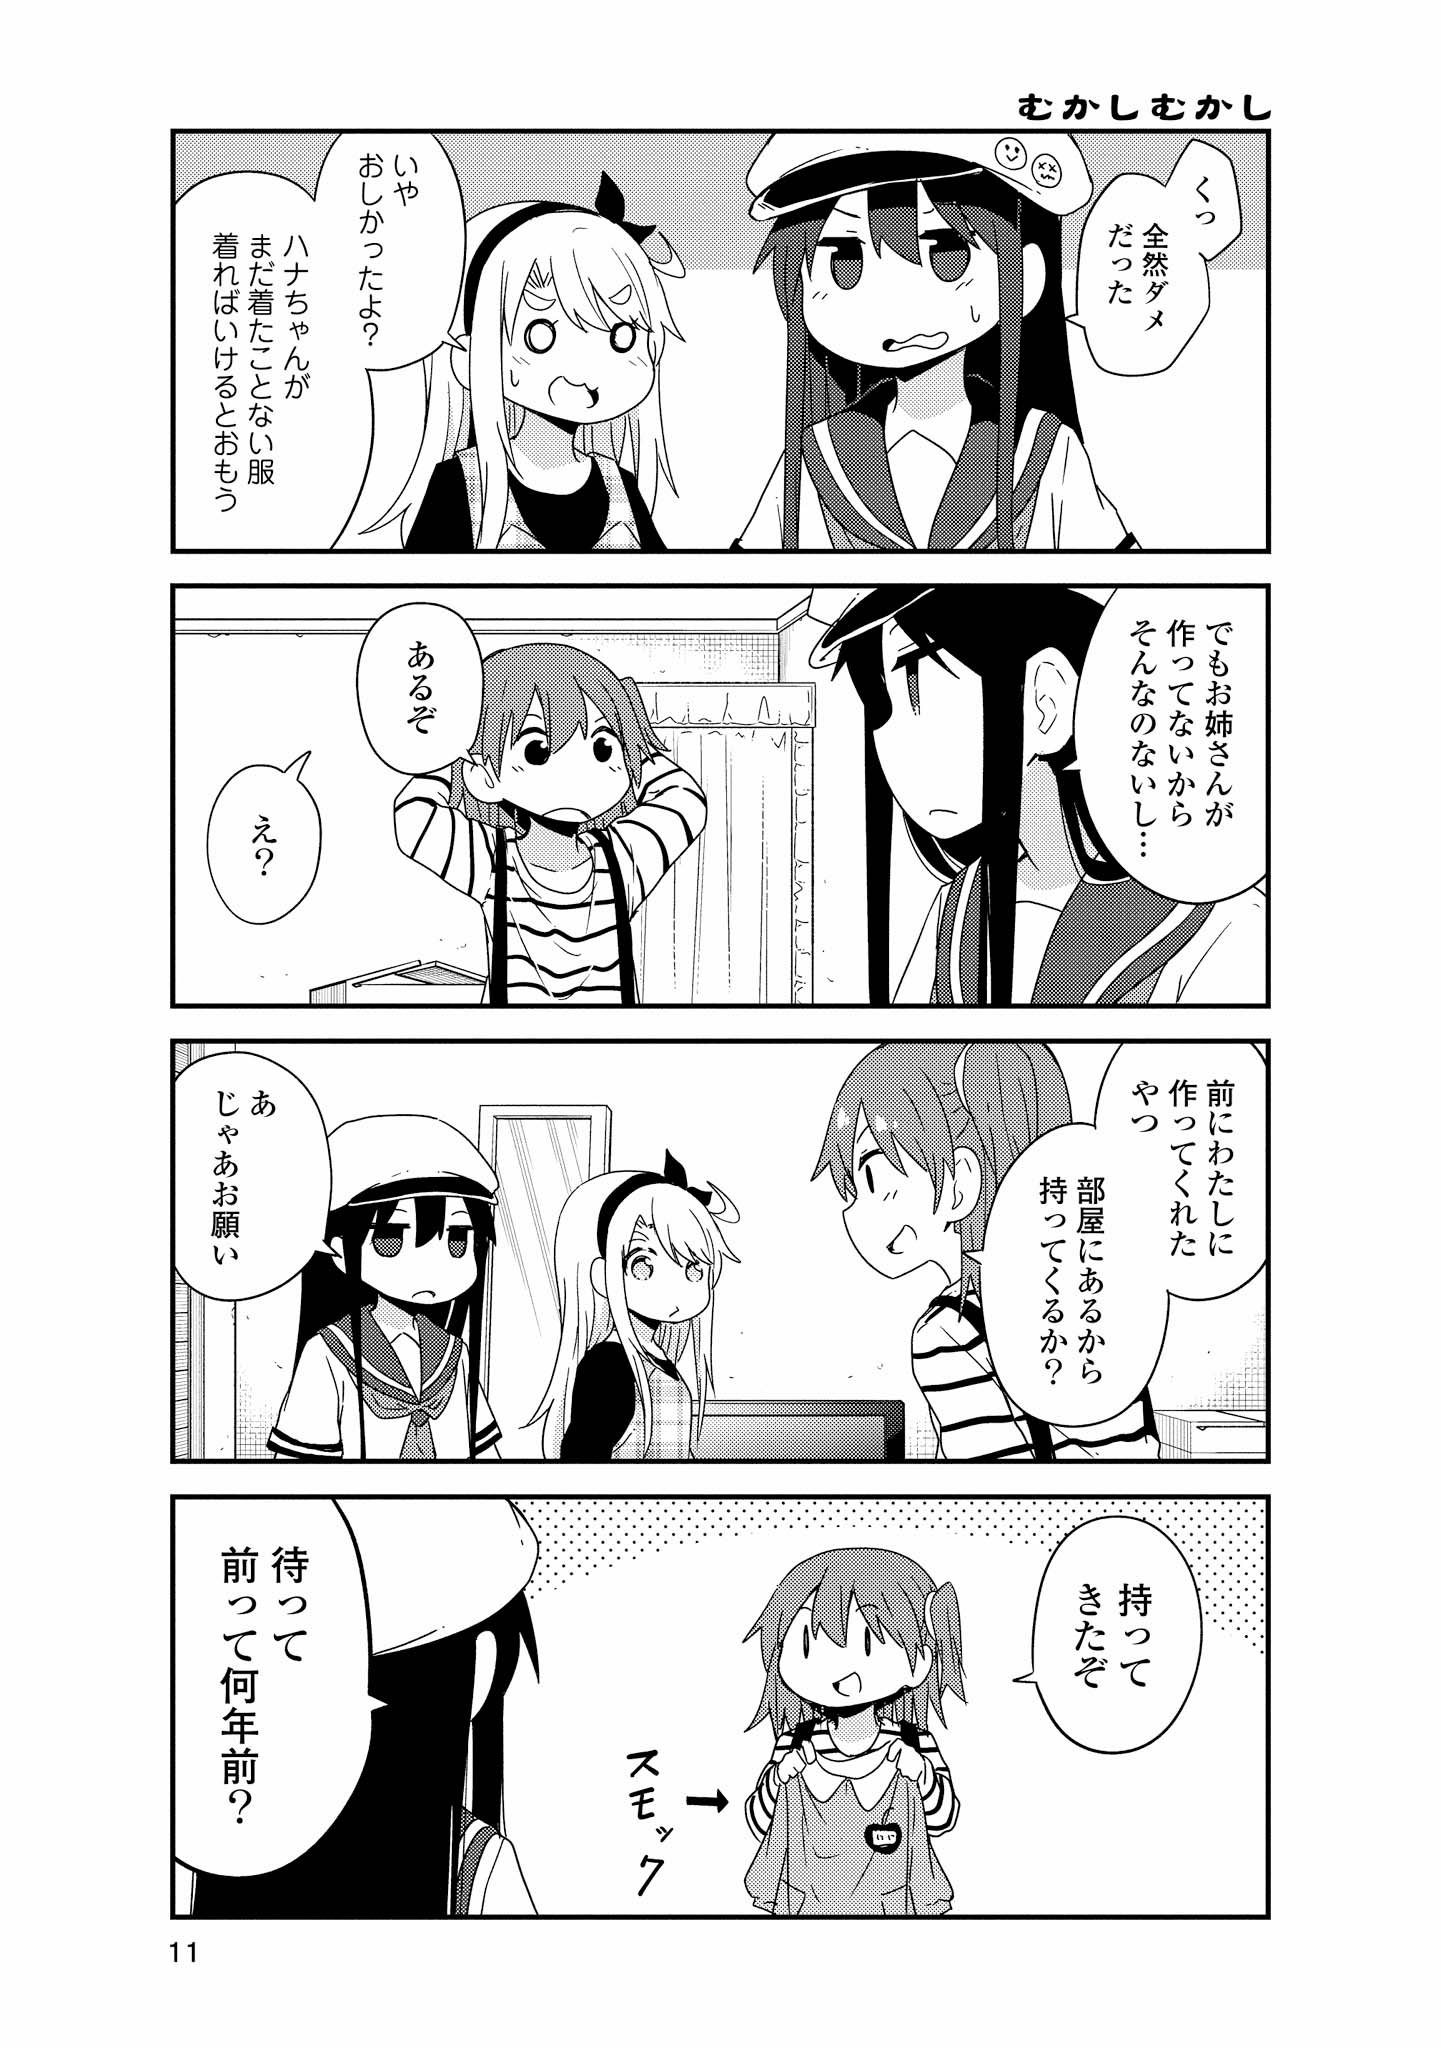 Wataten! An Angel Flew Down to Me 私に天使が舞い降りた！ 第37話 - Page 7